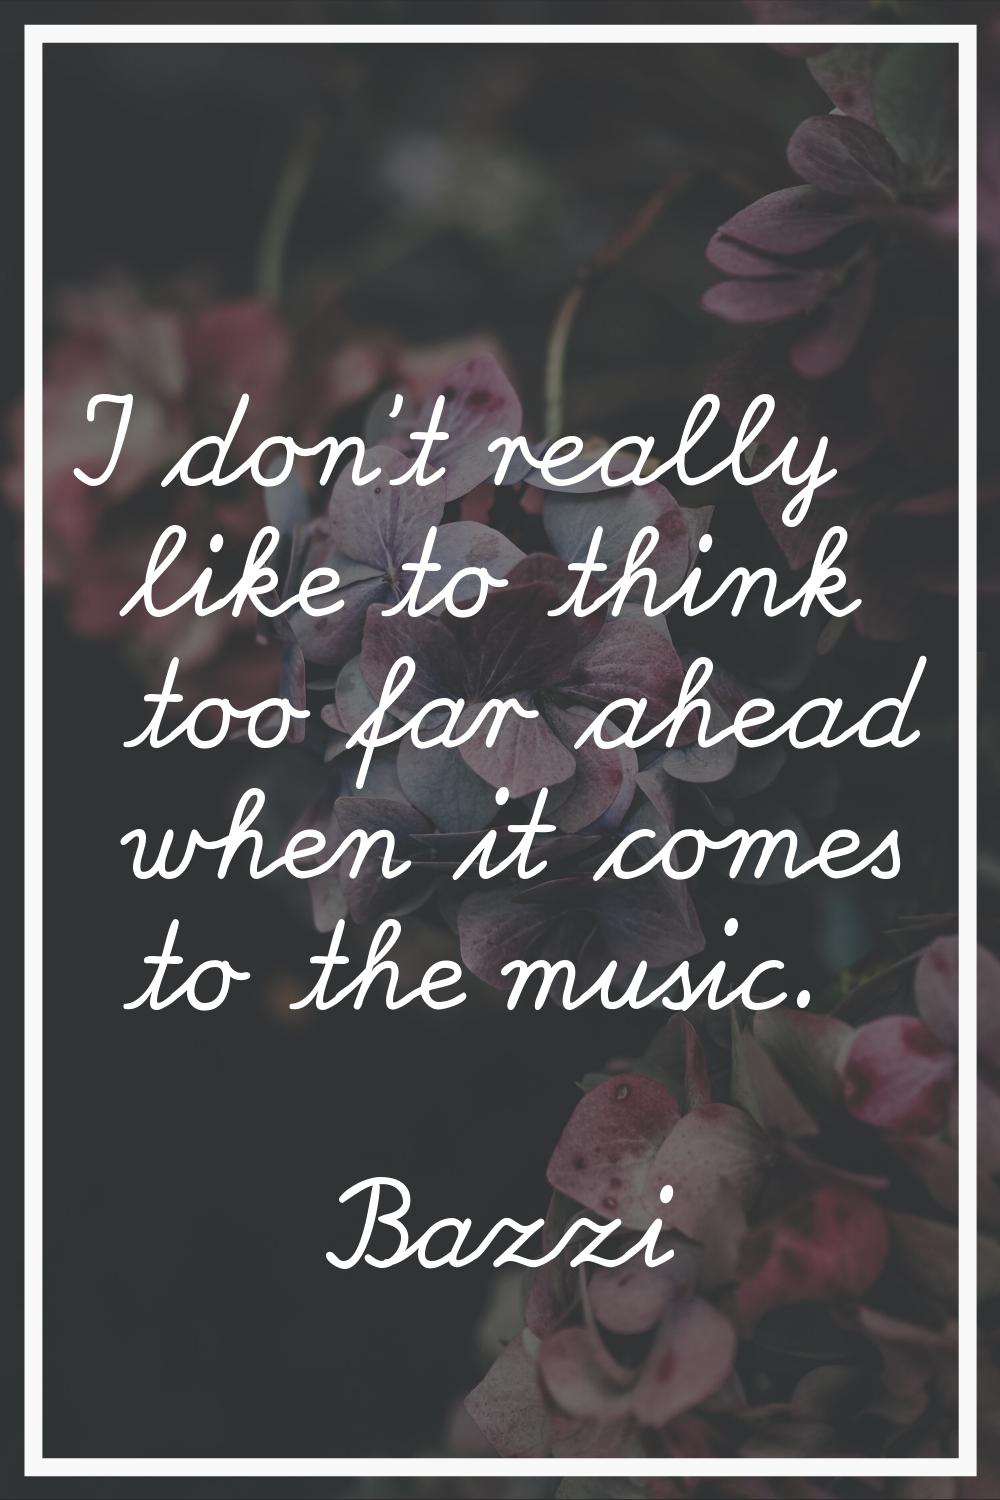 I don't really like to think too far ahead when it comes to the music.